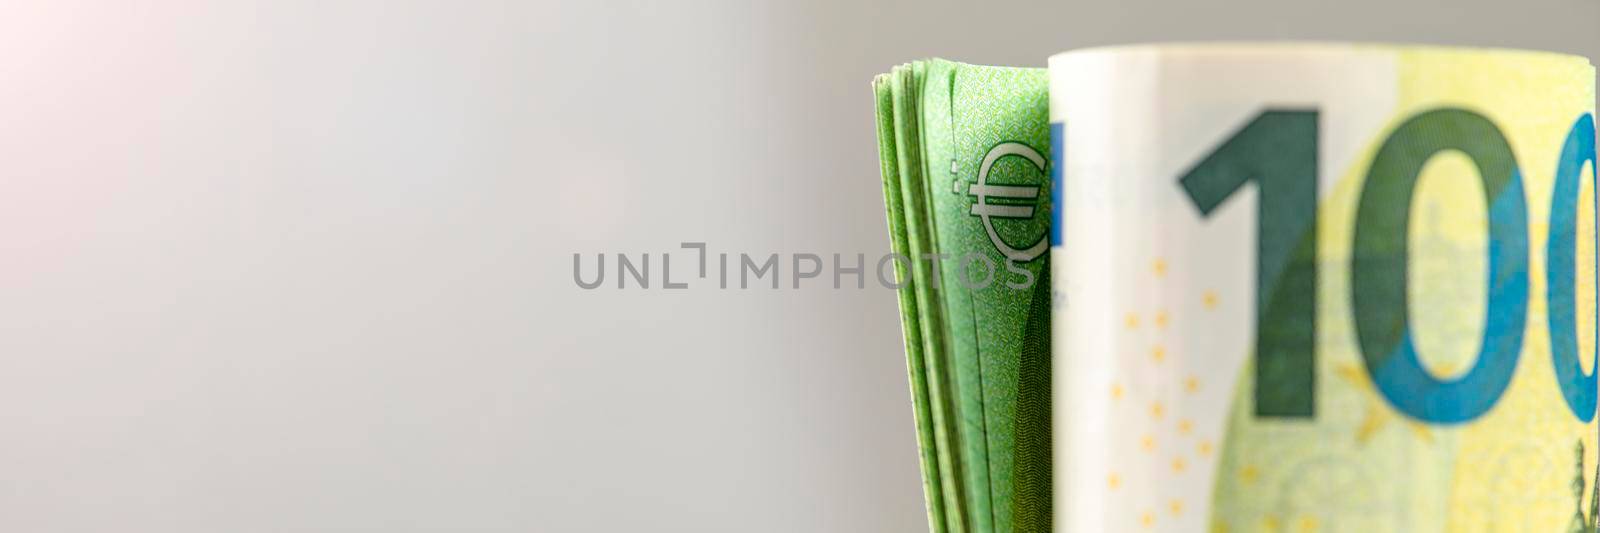 Roll of money. Roll of 100 euro banknotes. Euro banknotes rolled up on a gray background. The concept of financial assistance, real estate purchase, loan or insurance payment. by SERSOL